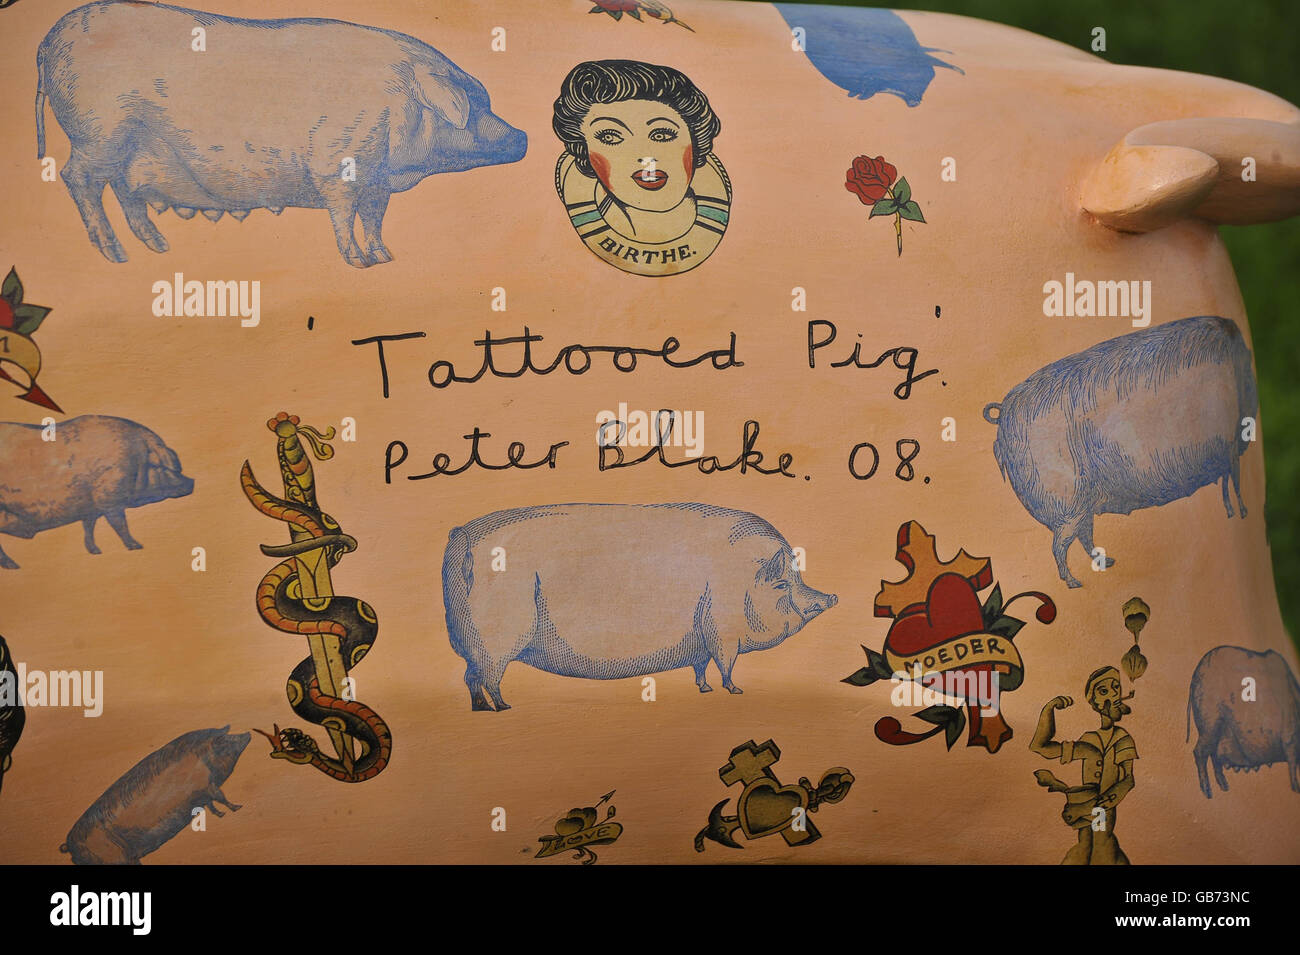 A signature on the back of one of the King Bladud's Pigs in Bath by Peter Blake, the artist that designed the Beatles Sgt Peppers album cover, on the lawn in front of the Royal Crescent in Bath. Stock Photo